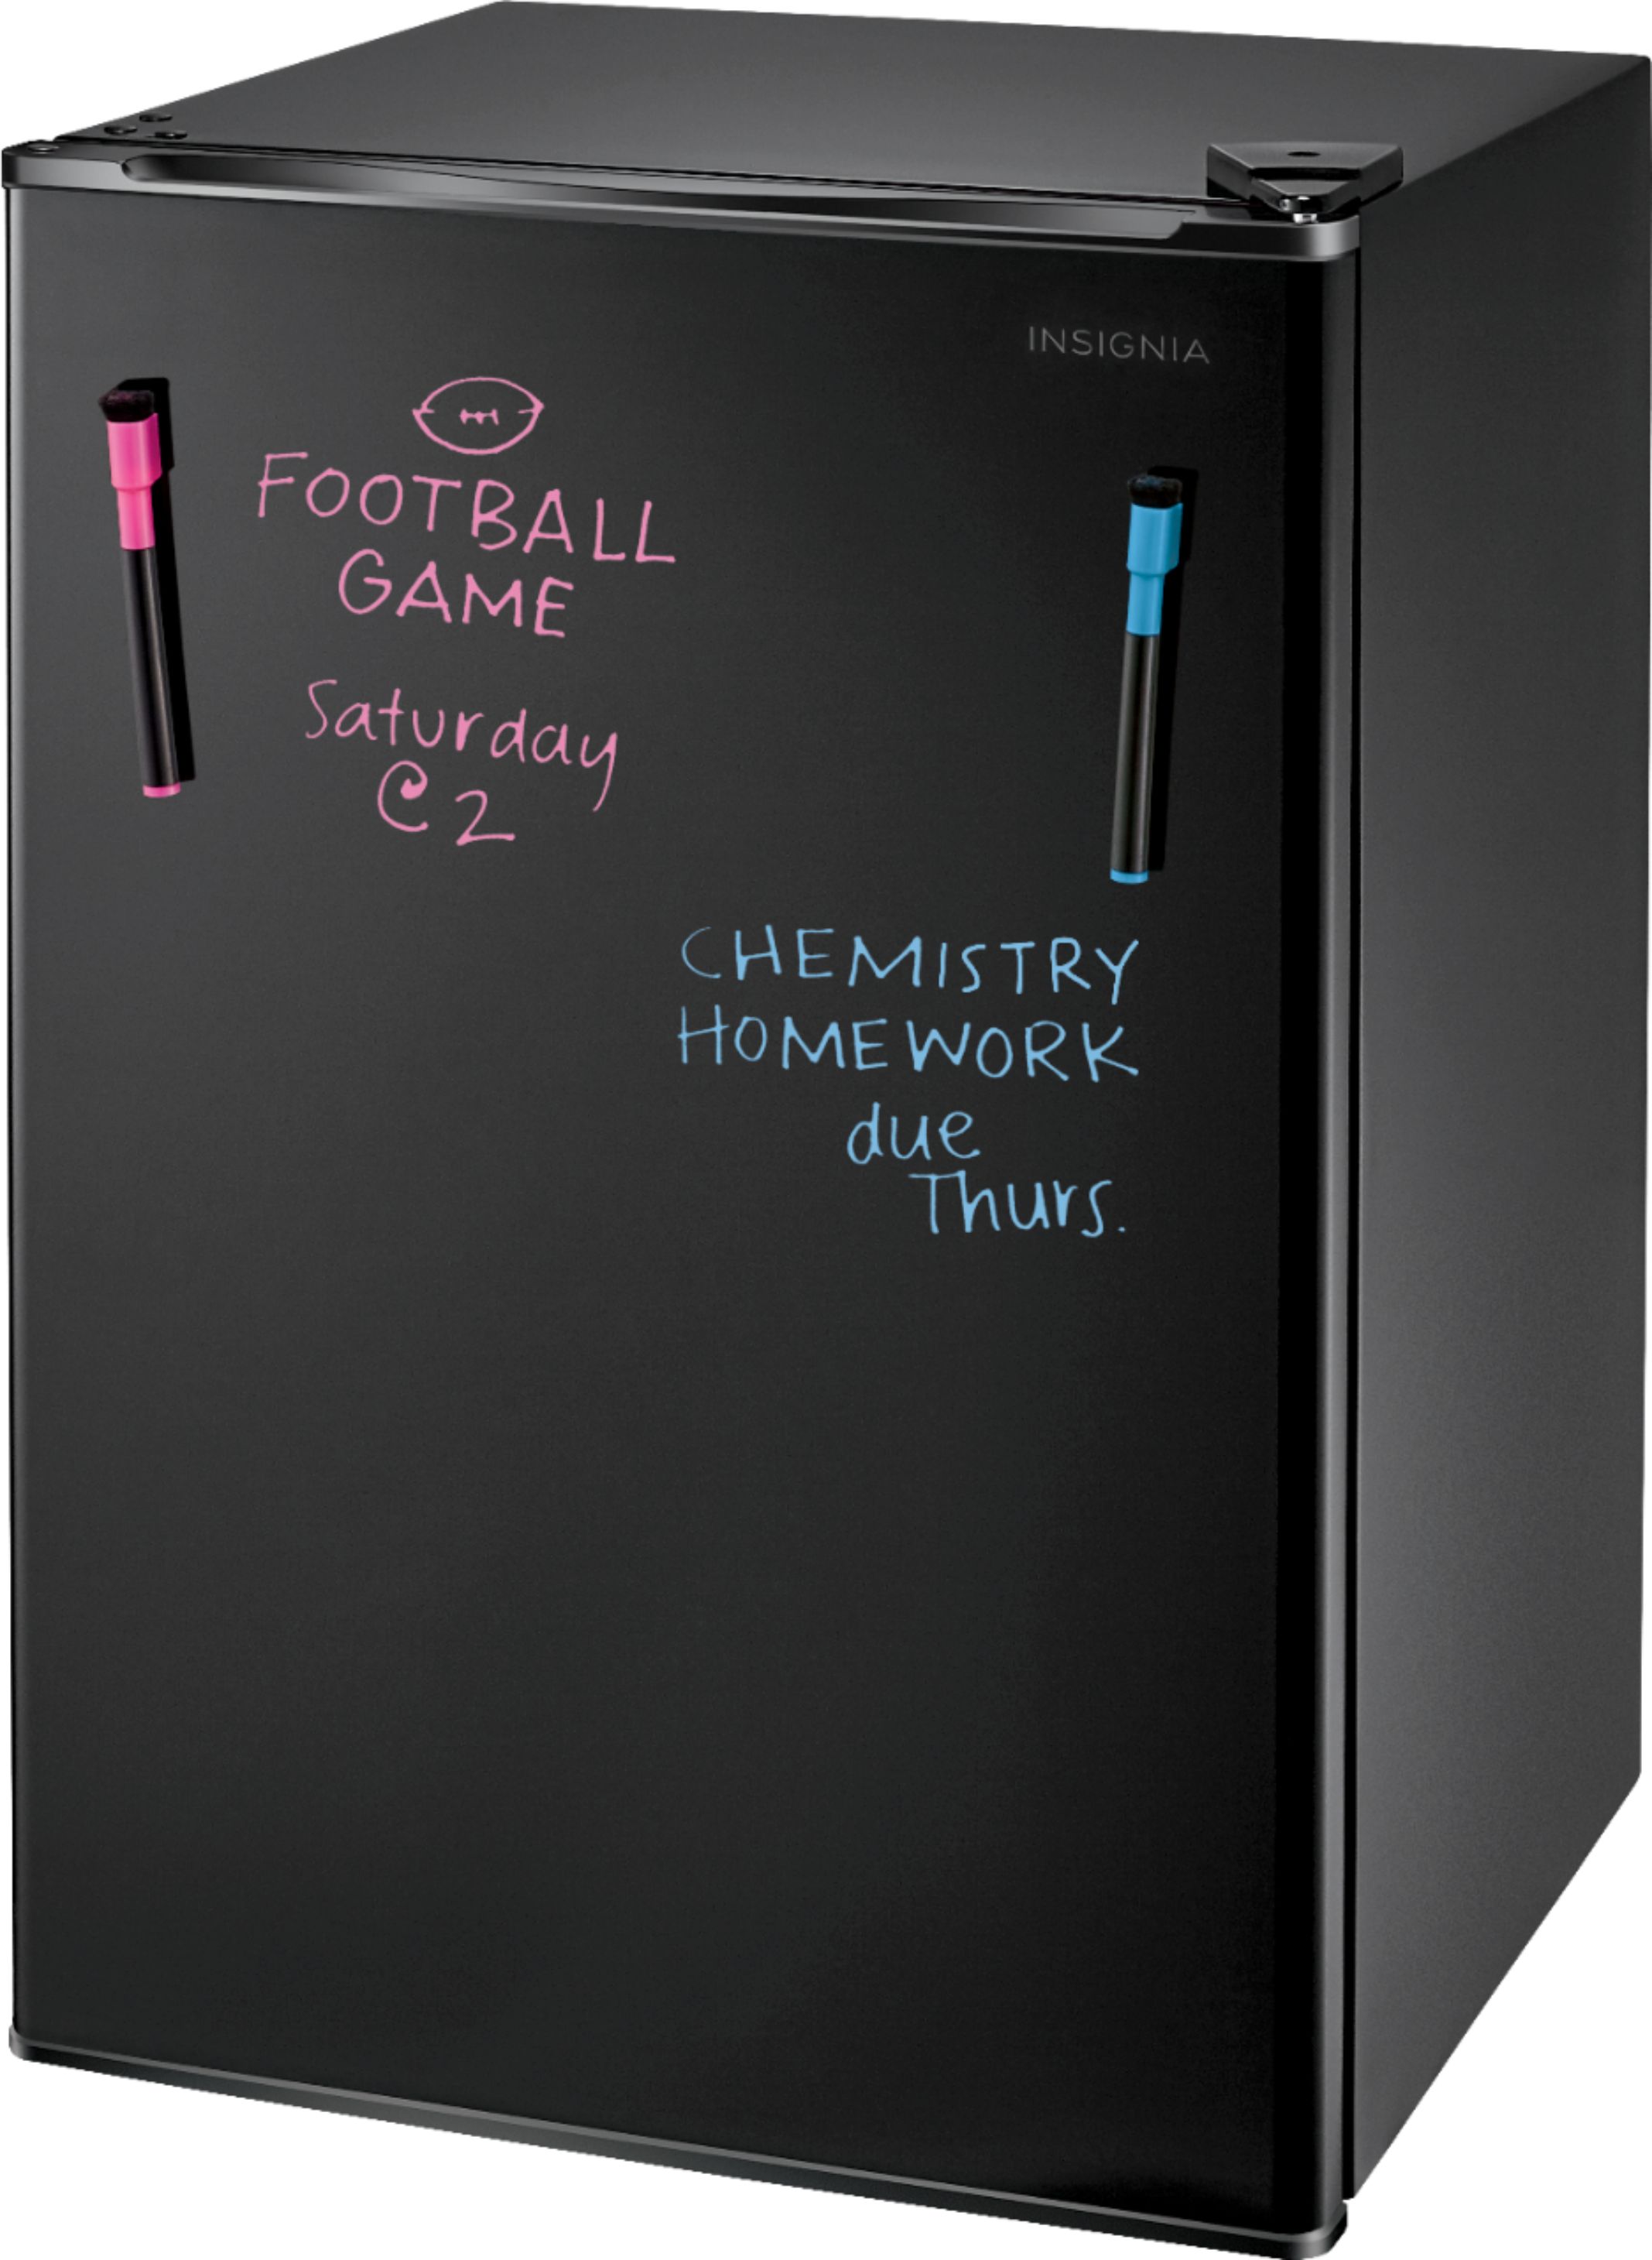 Save 44% on an Insignia Mini Fridge, Now $150 at Best Buy